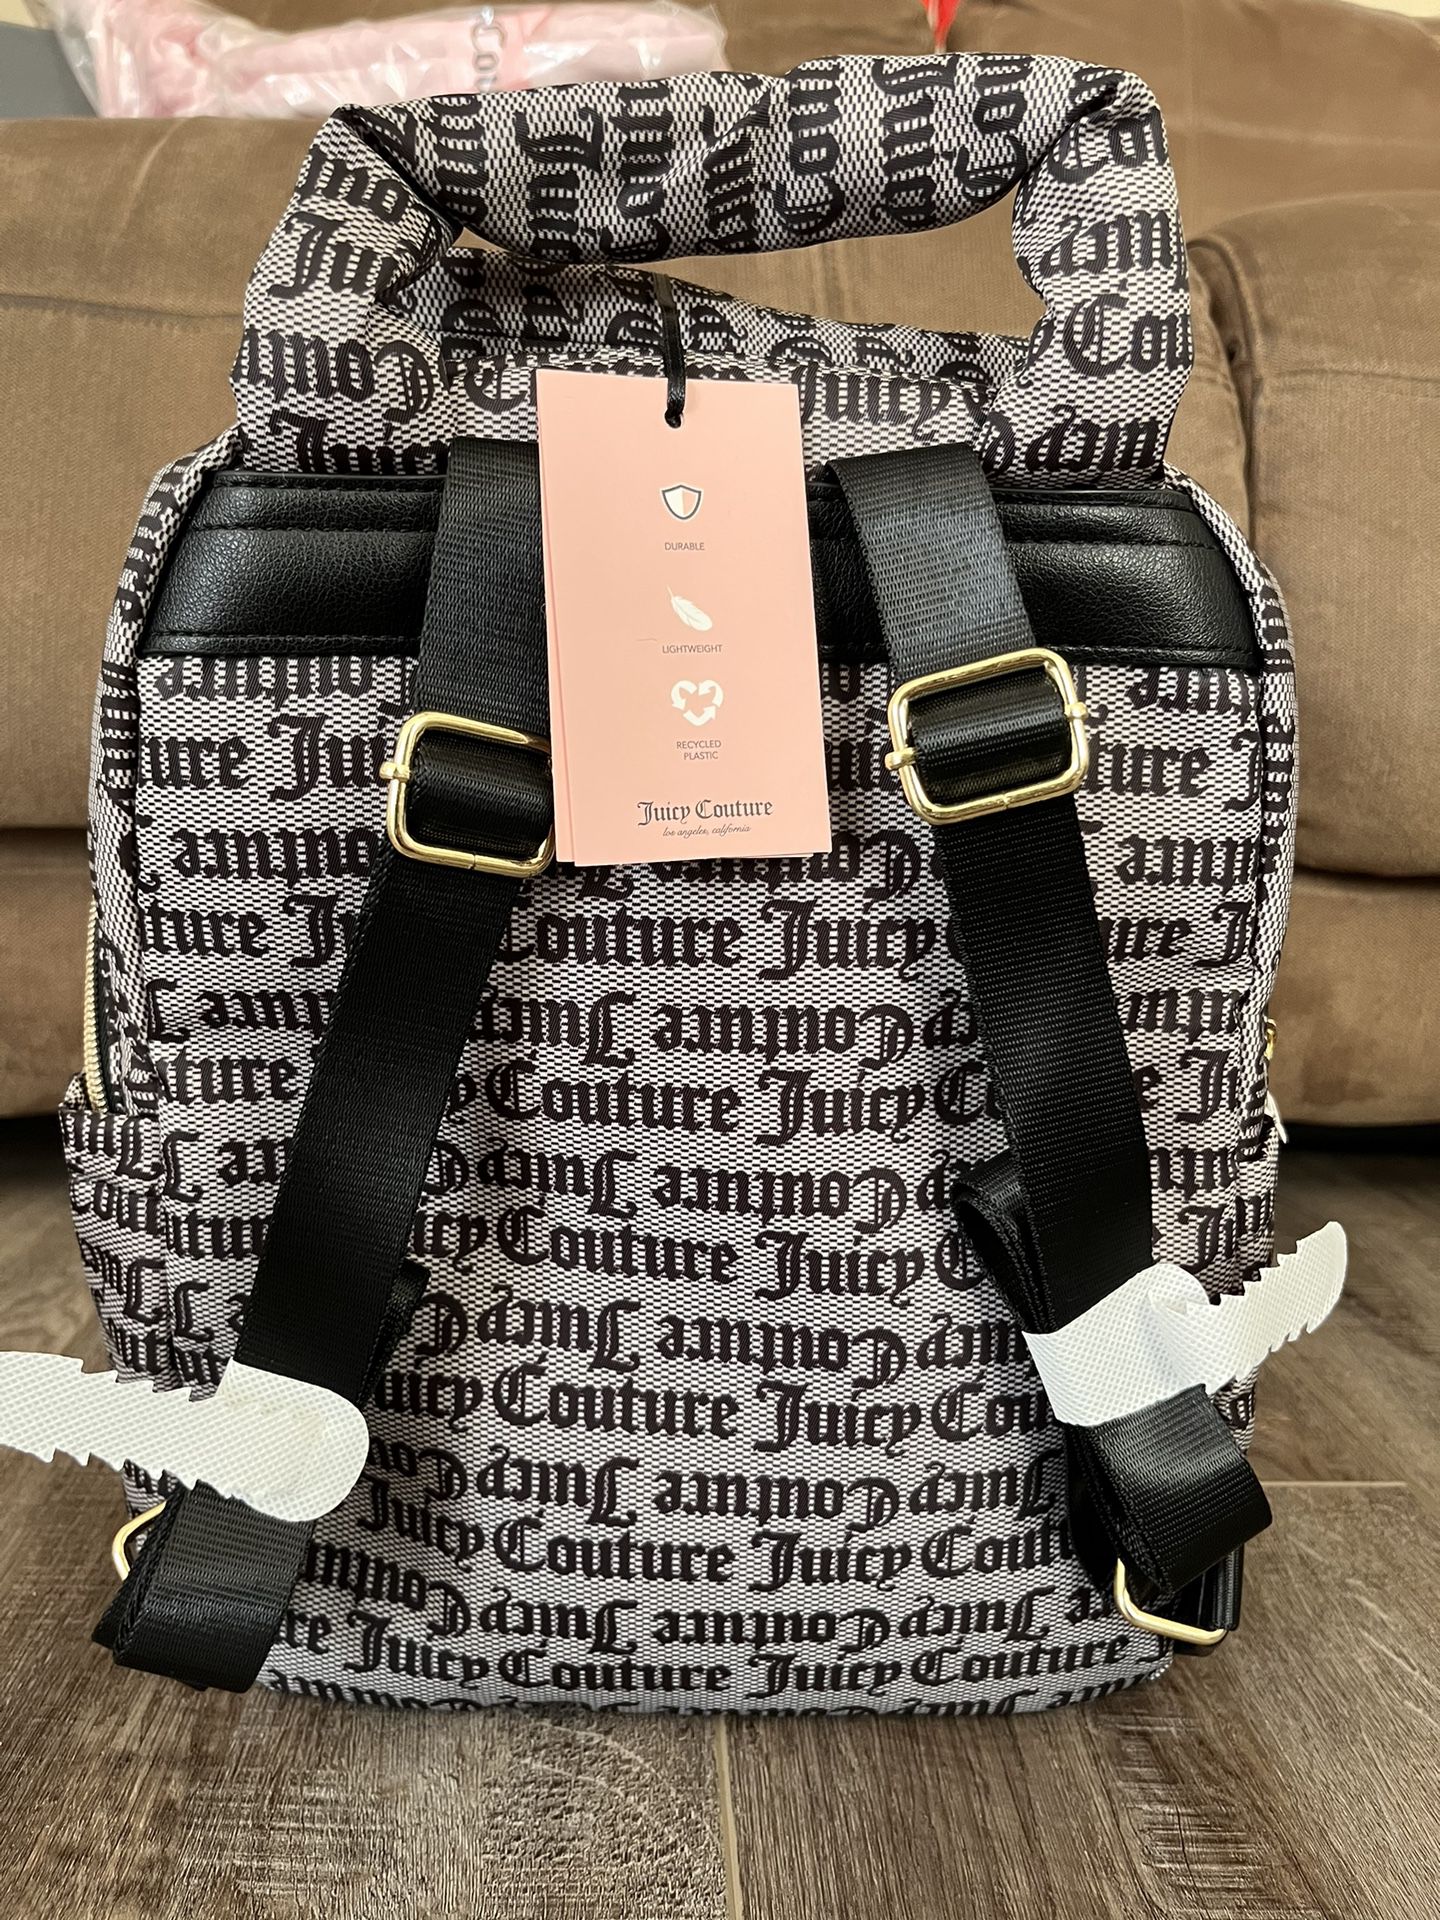 Juicy Couture Backpack for Sale in Temecula, CA - OfferUp